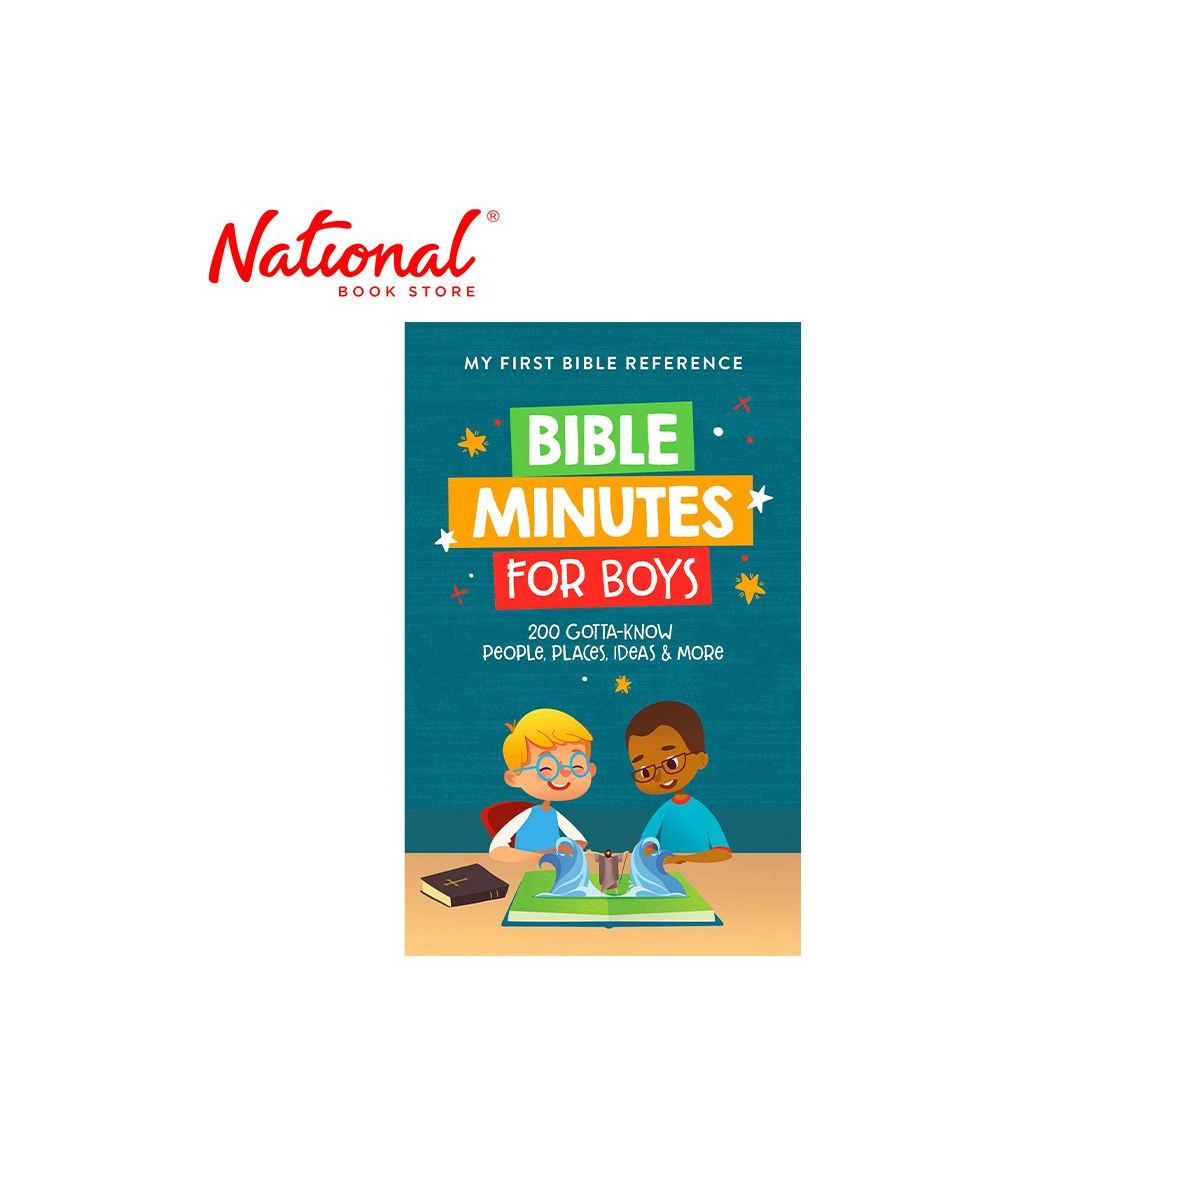 Bible Minutes for Boys 200 Gotta-Know People, Places, Ideas, and More! - Trade Paperback